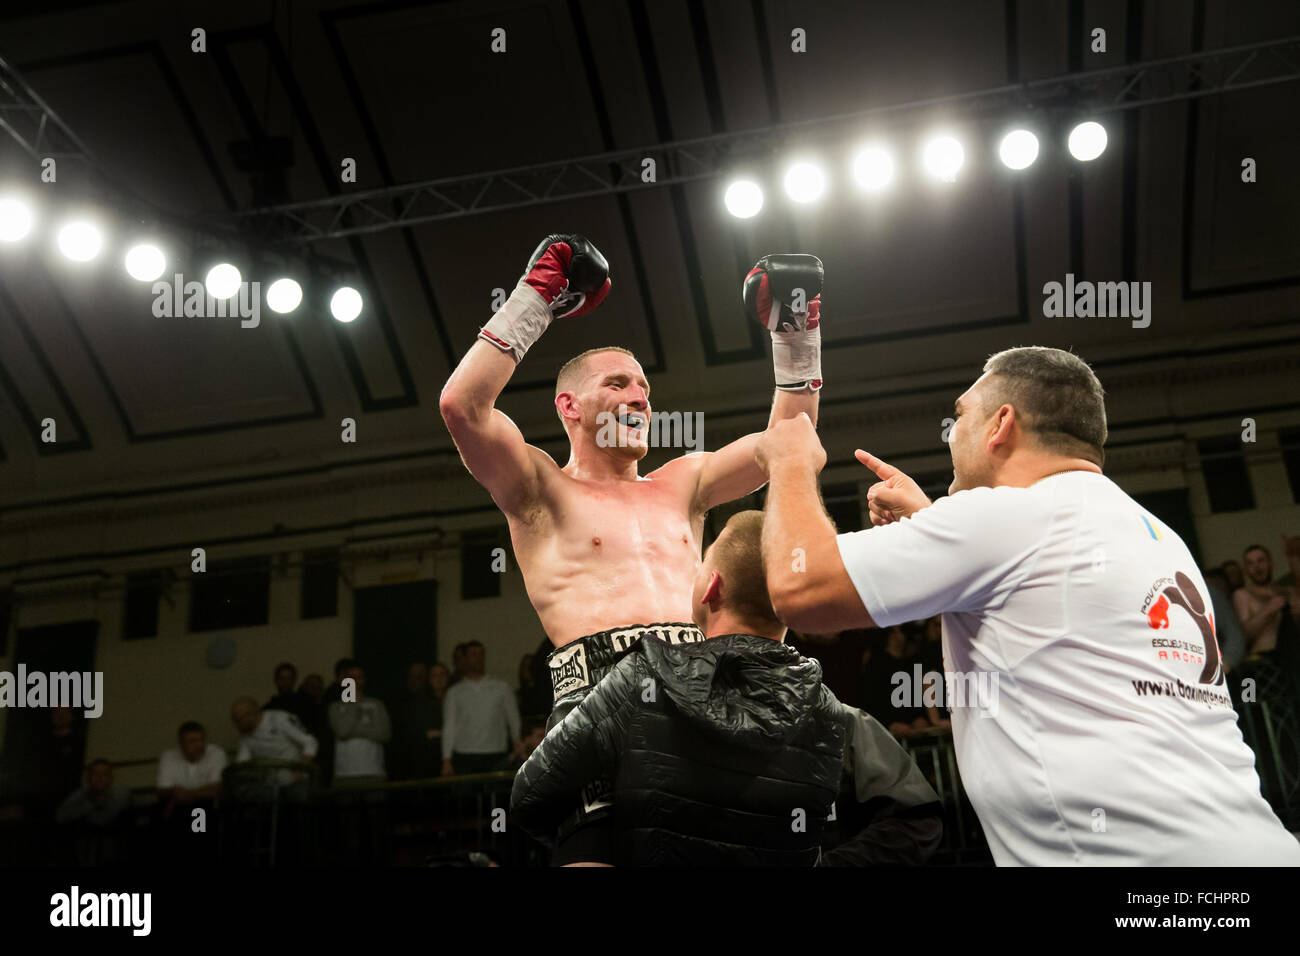 British Featherweight High Resolution Stock Photography and - Alamy